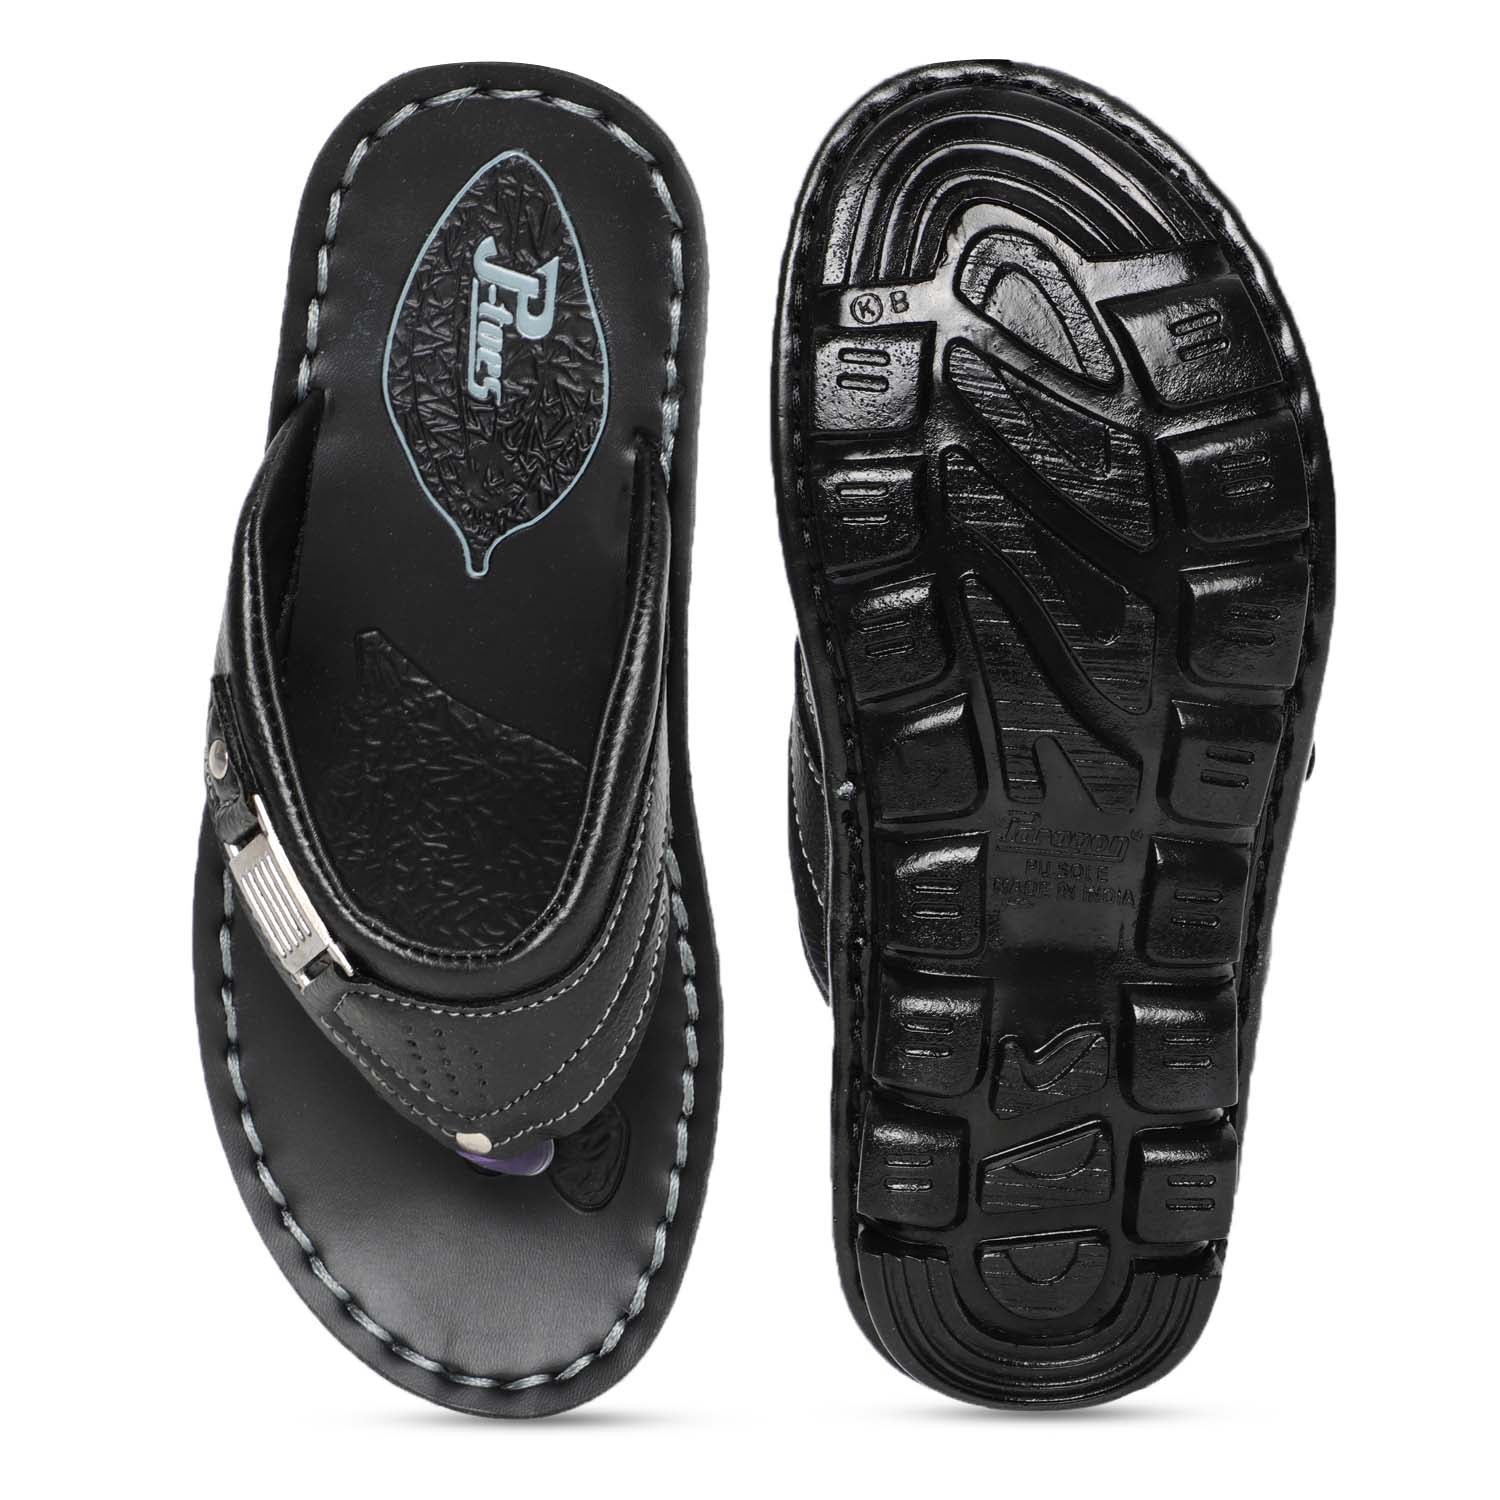 Paragon PU66075B Kids Casual Fashion Sandals | Comfortable Flat Sandals | Trendy Outdoor Indoor Floaters for Boys &amp; Girls